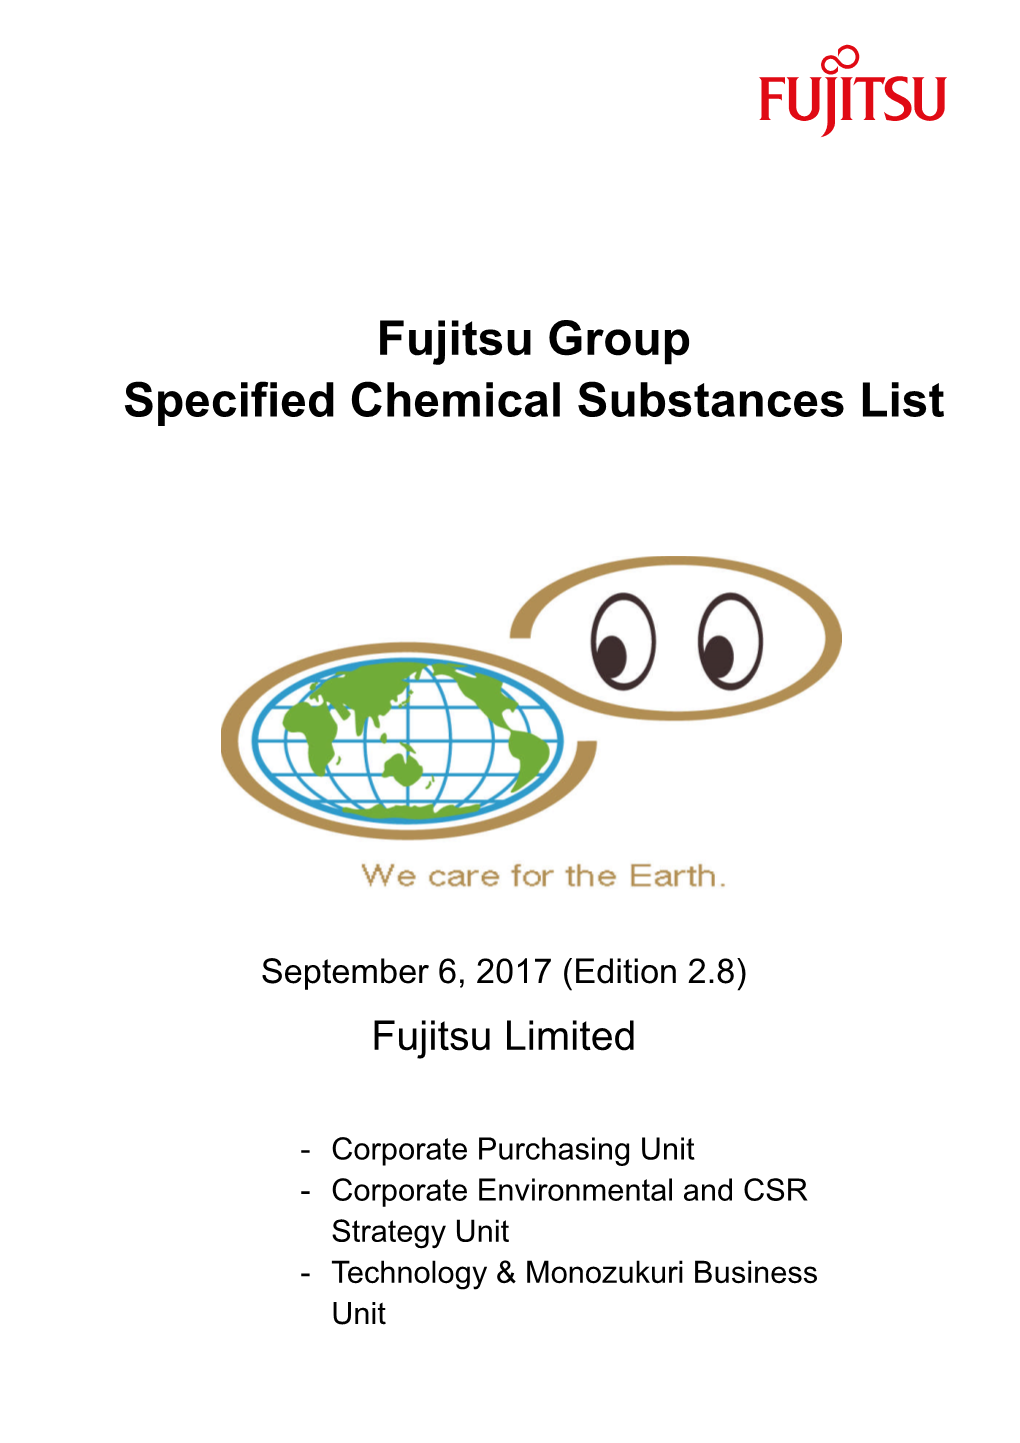 Fujitsu Group Specified Chemical Substances List